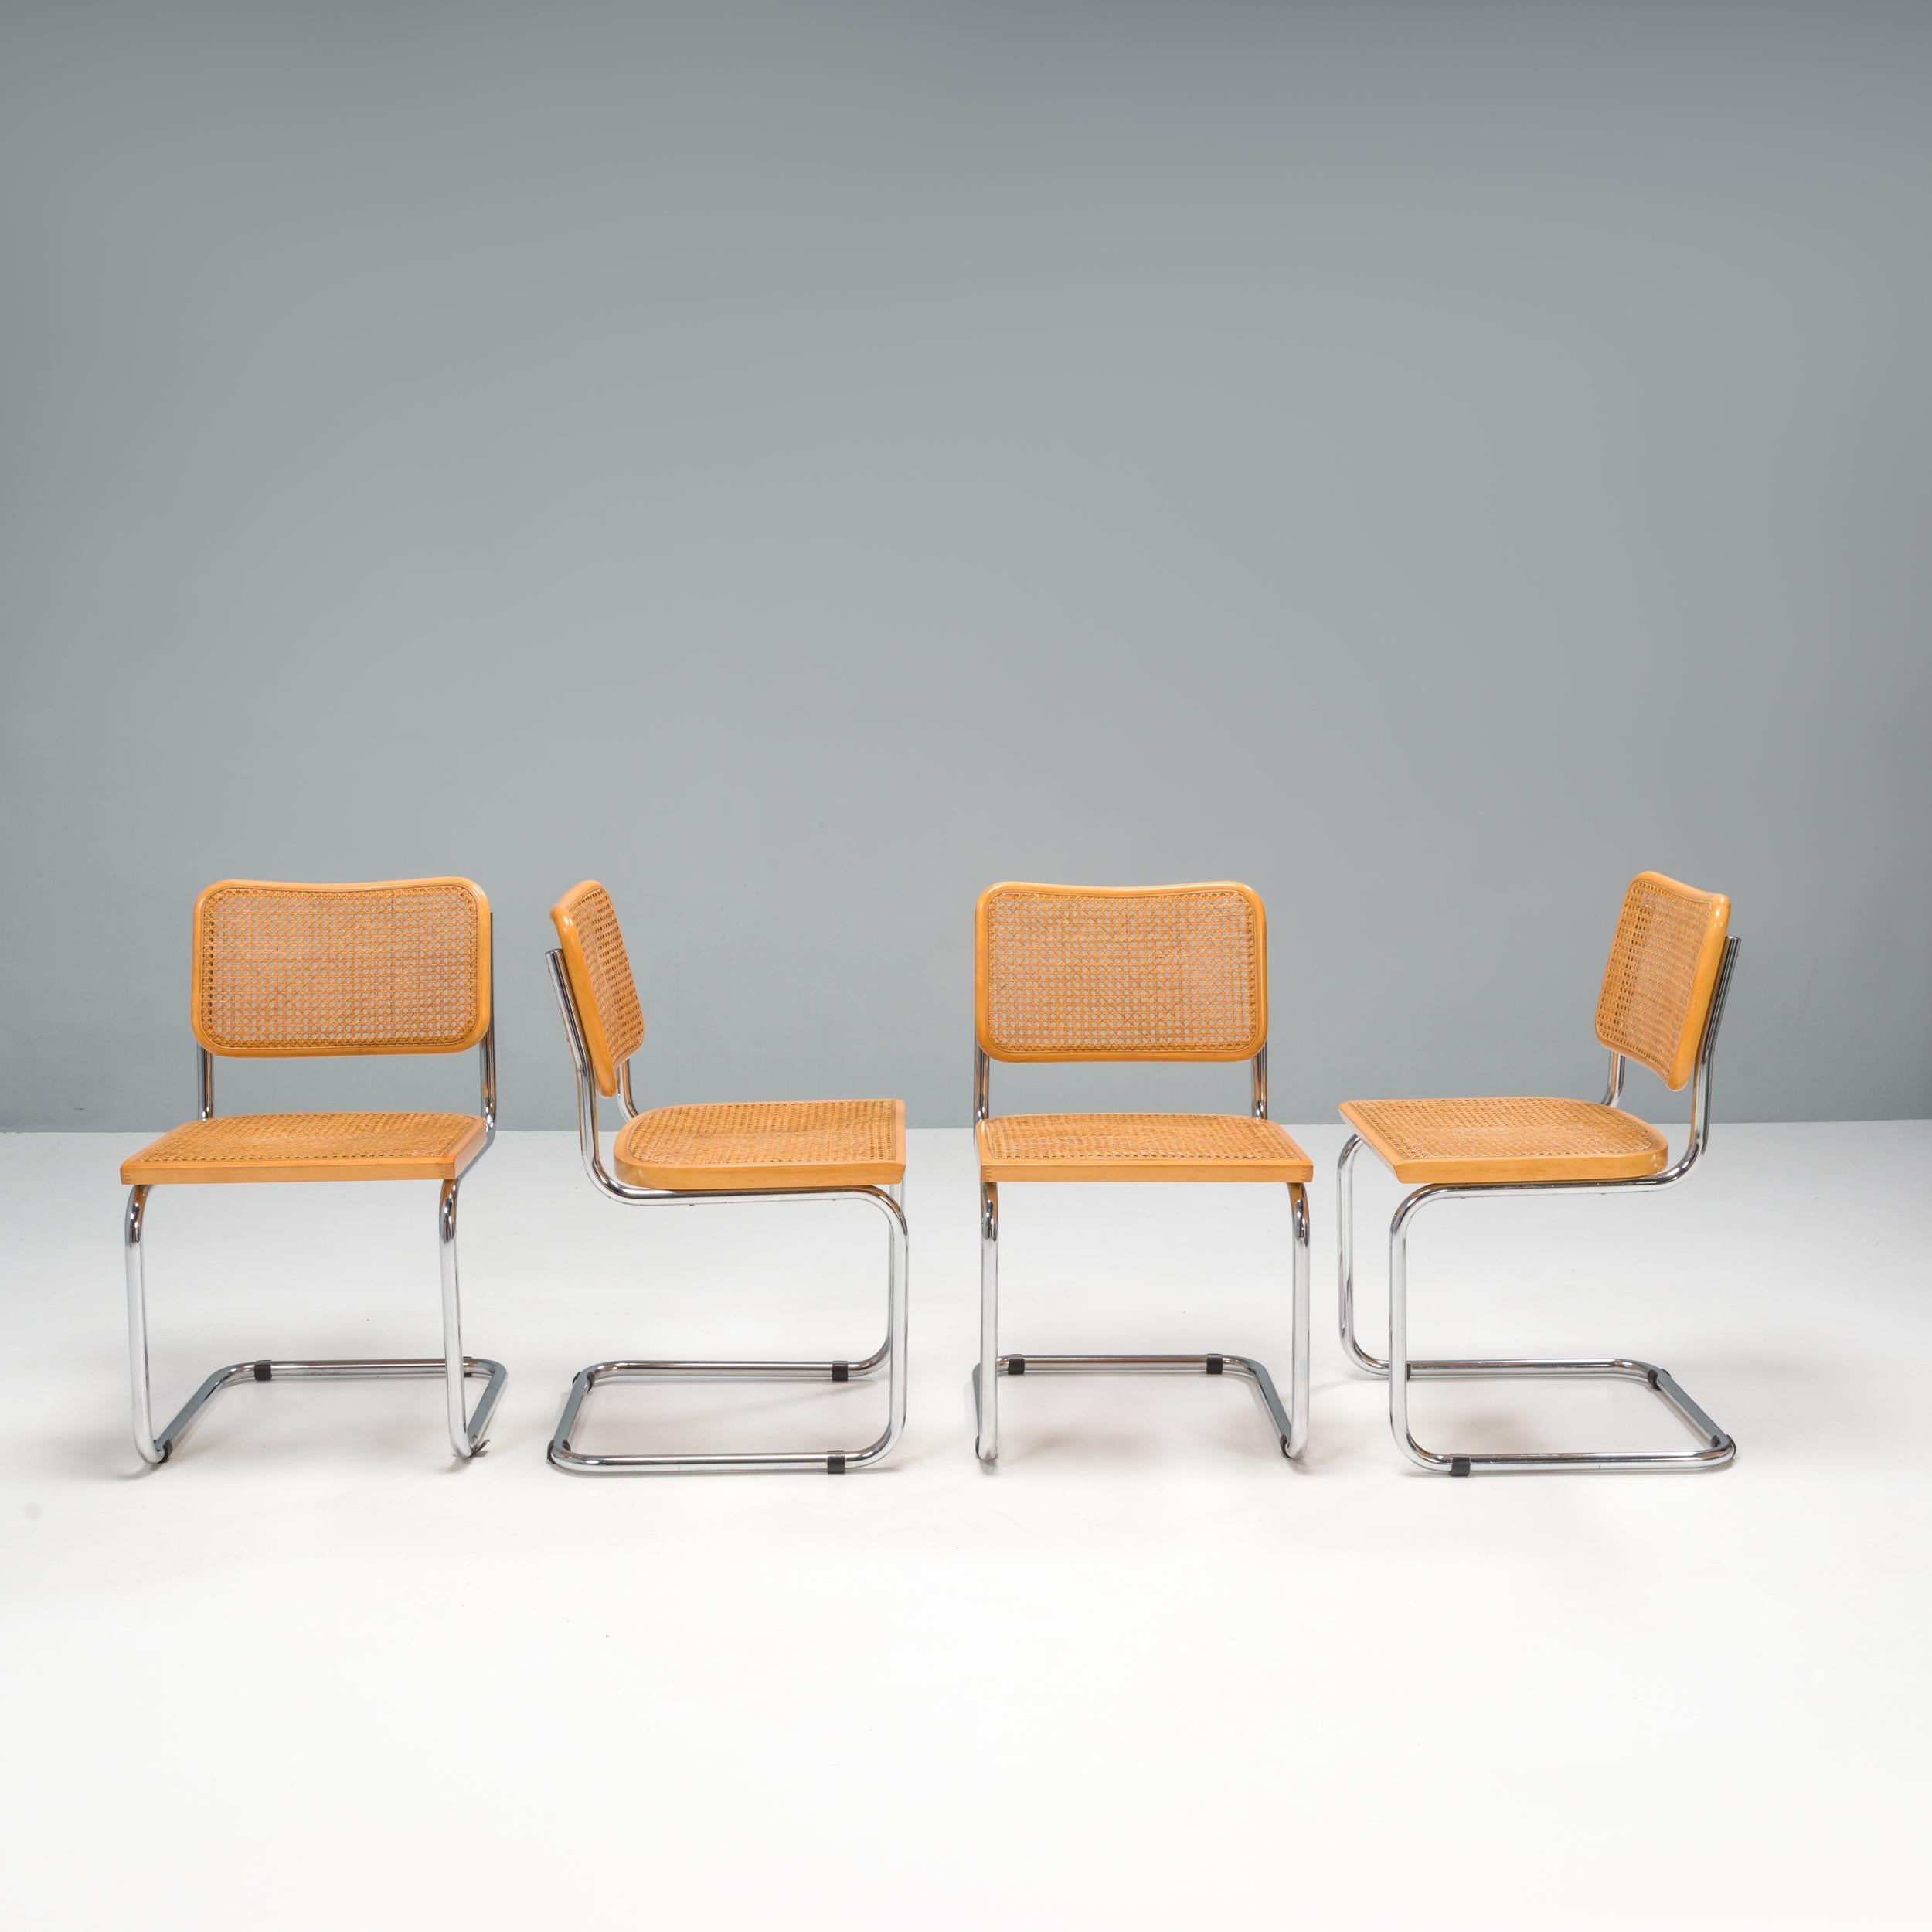 One of the most iconic designs of the 20th century, the Cesca chair was designed by Marcel Breuer in 1928 and has been manufactured by Knoll since the 1960s.

Using the same construction of Breuers 1925 designs, the Wassily Chair and Laccio Table,